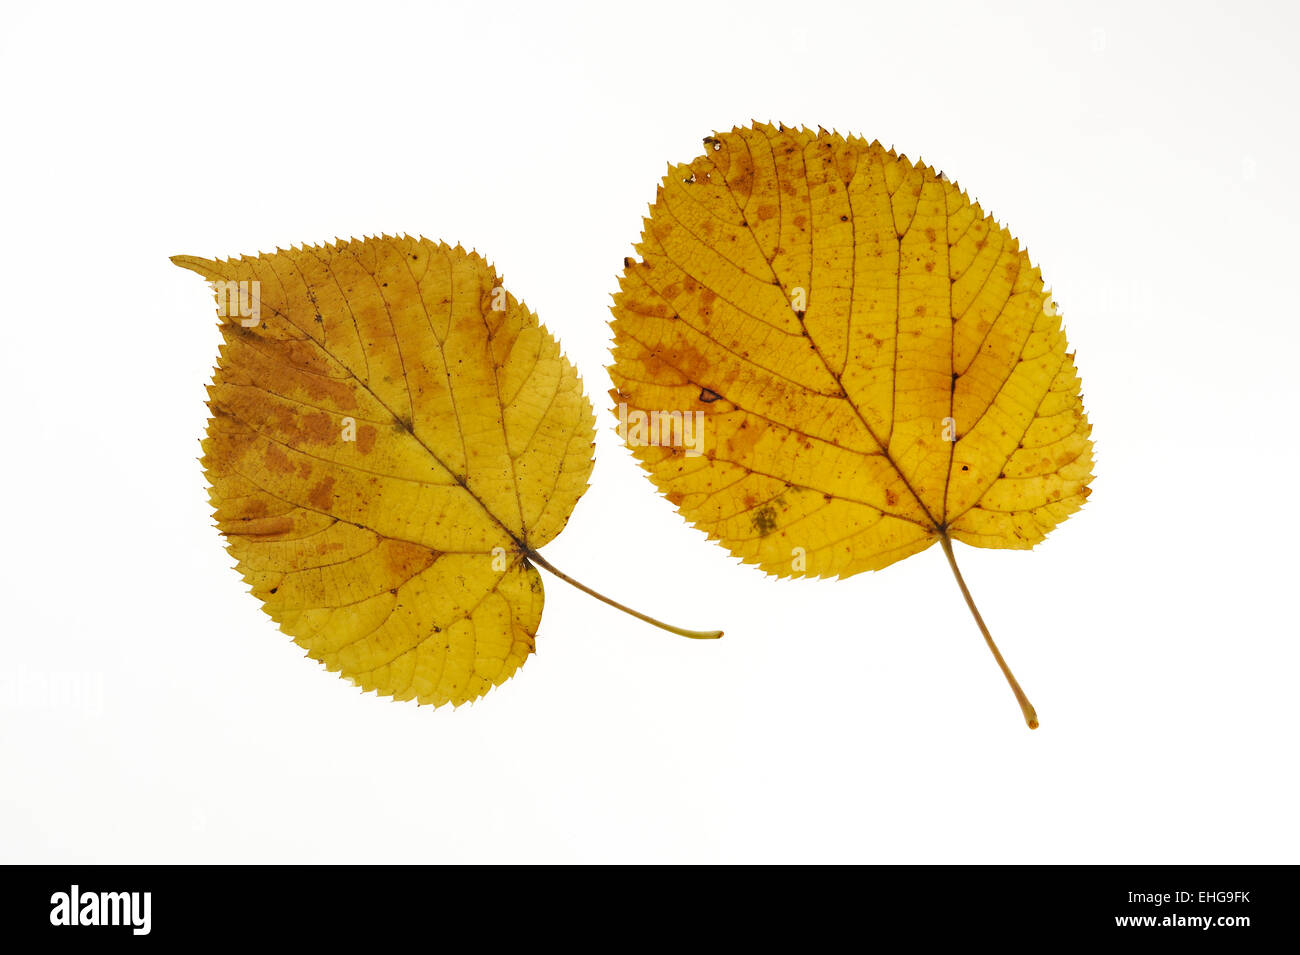 Basswood / American linden / Lime-tree (Tilia americana) leaves in autumn colours, native to eastern North America Stock Photo